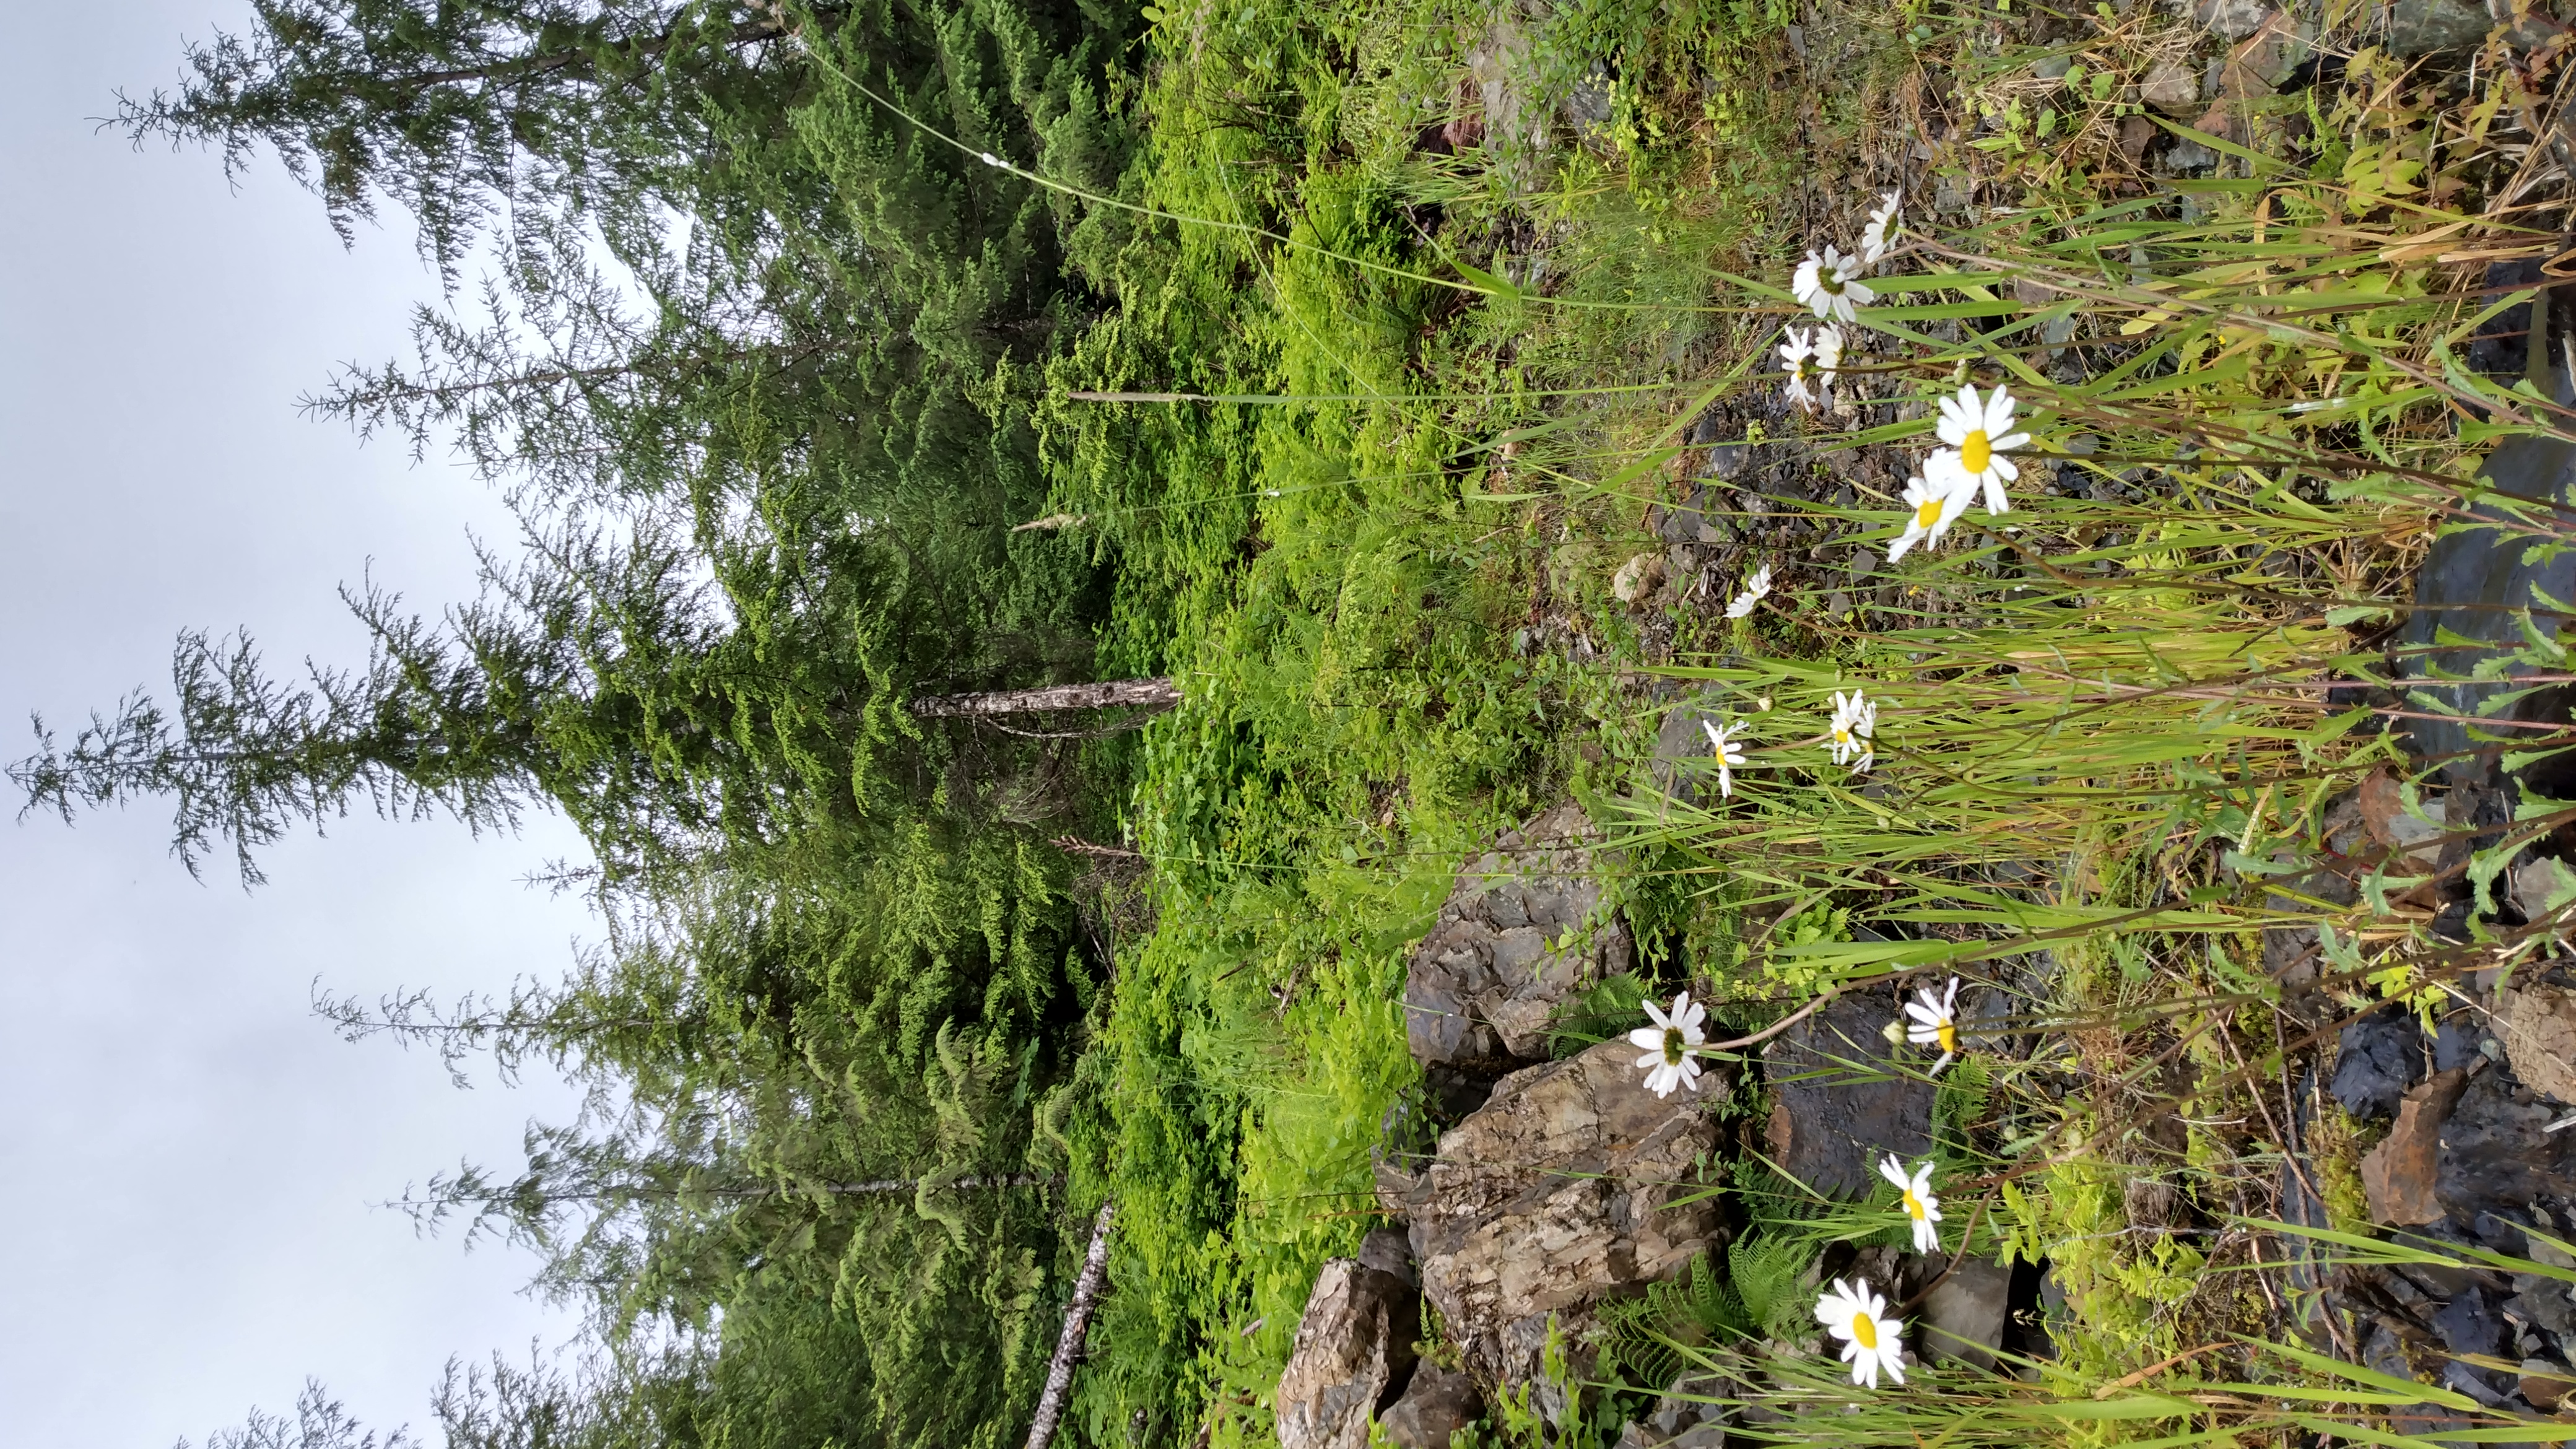 Some daisies on a rocky hillside with other grass and shrubs, and some conifer trees farther up the hill in the background